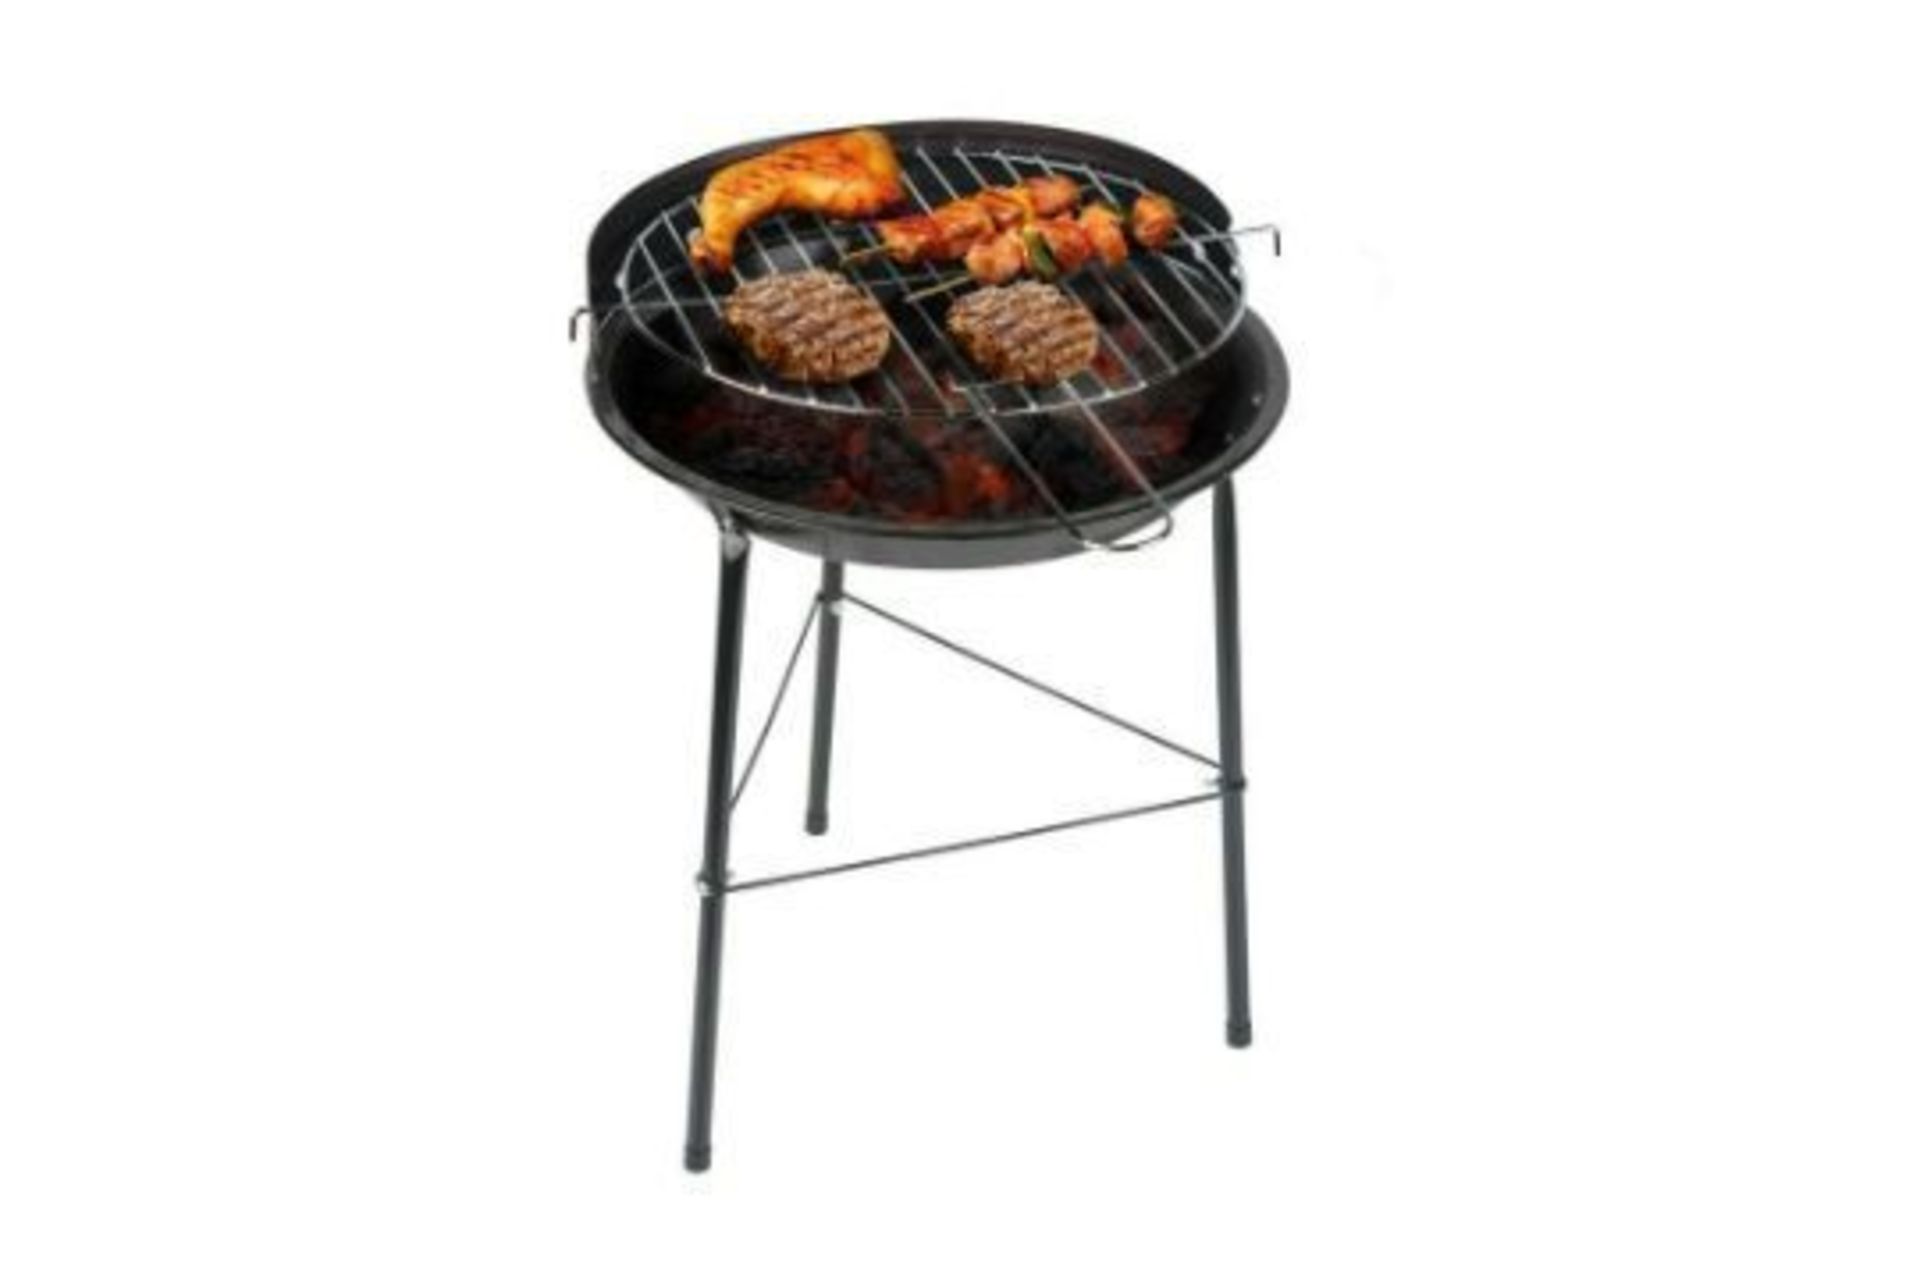 New 43cm Barbeque Grill